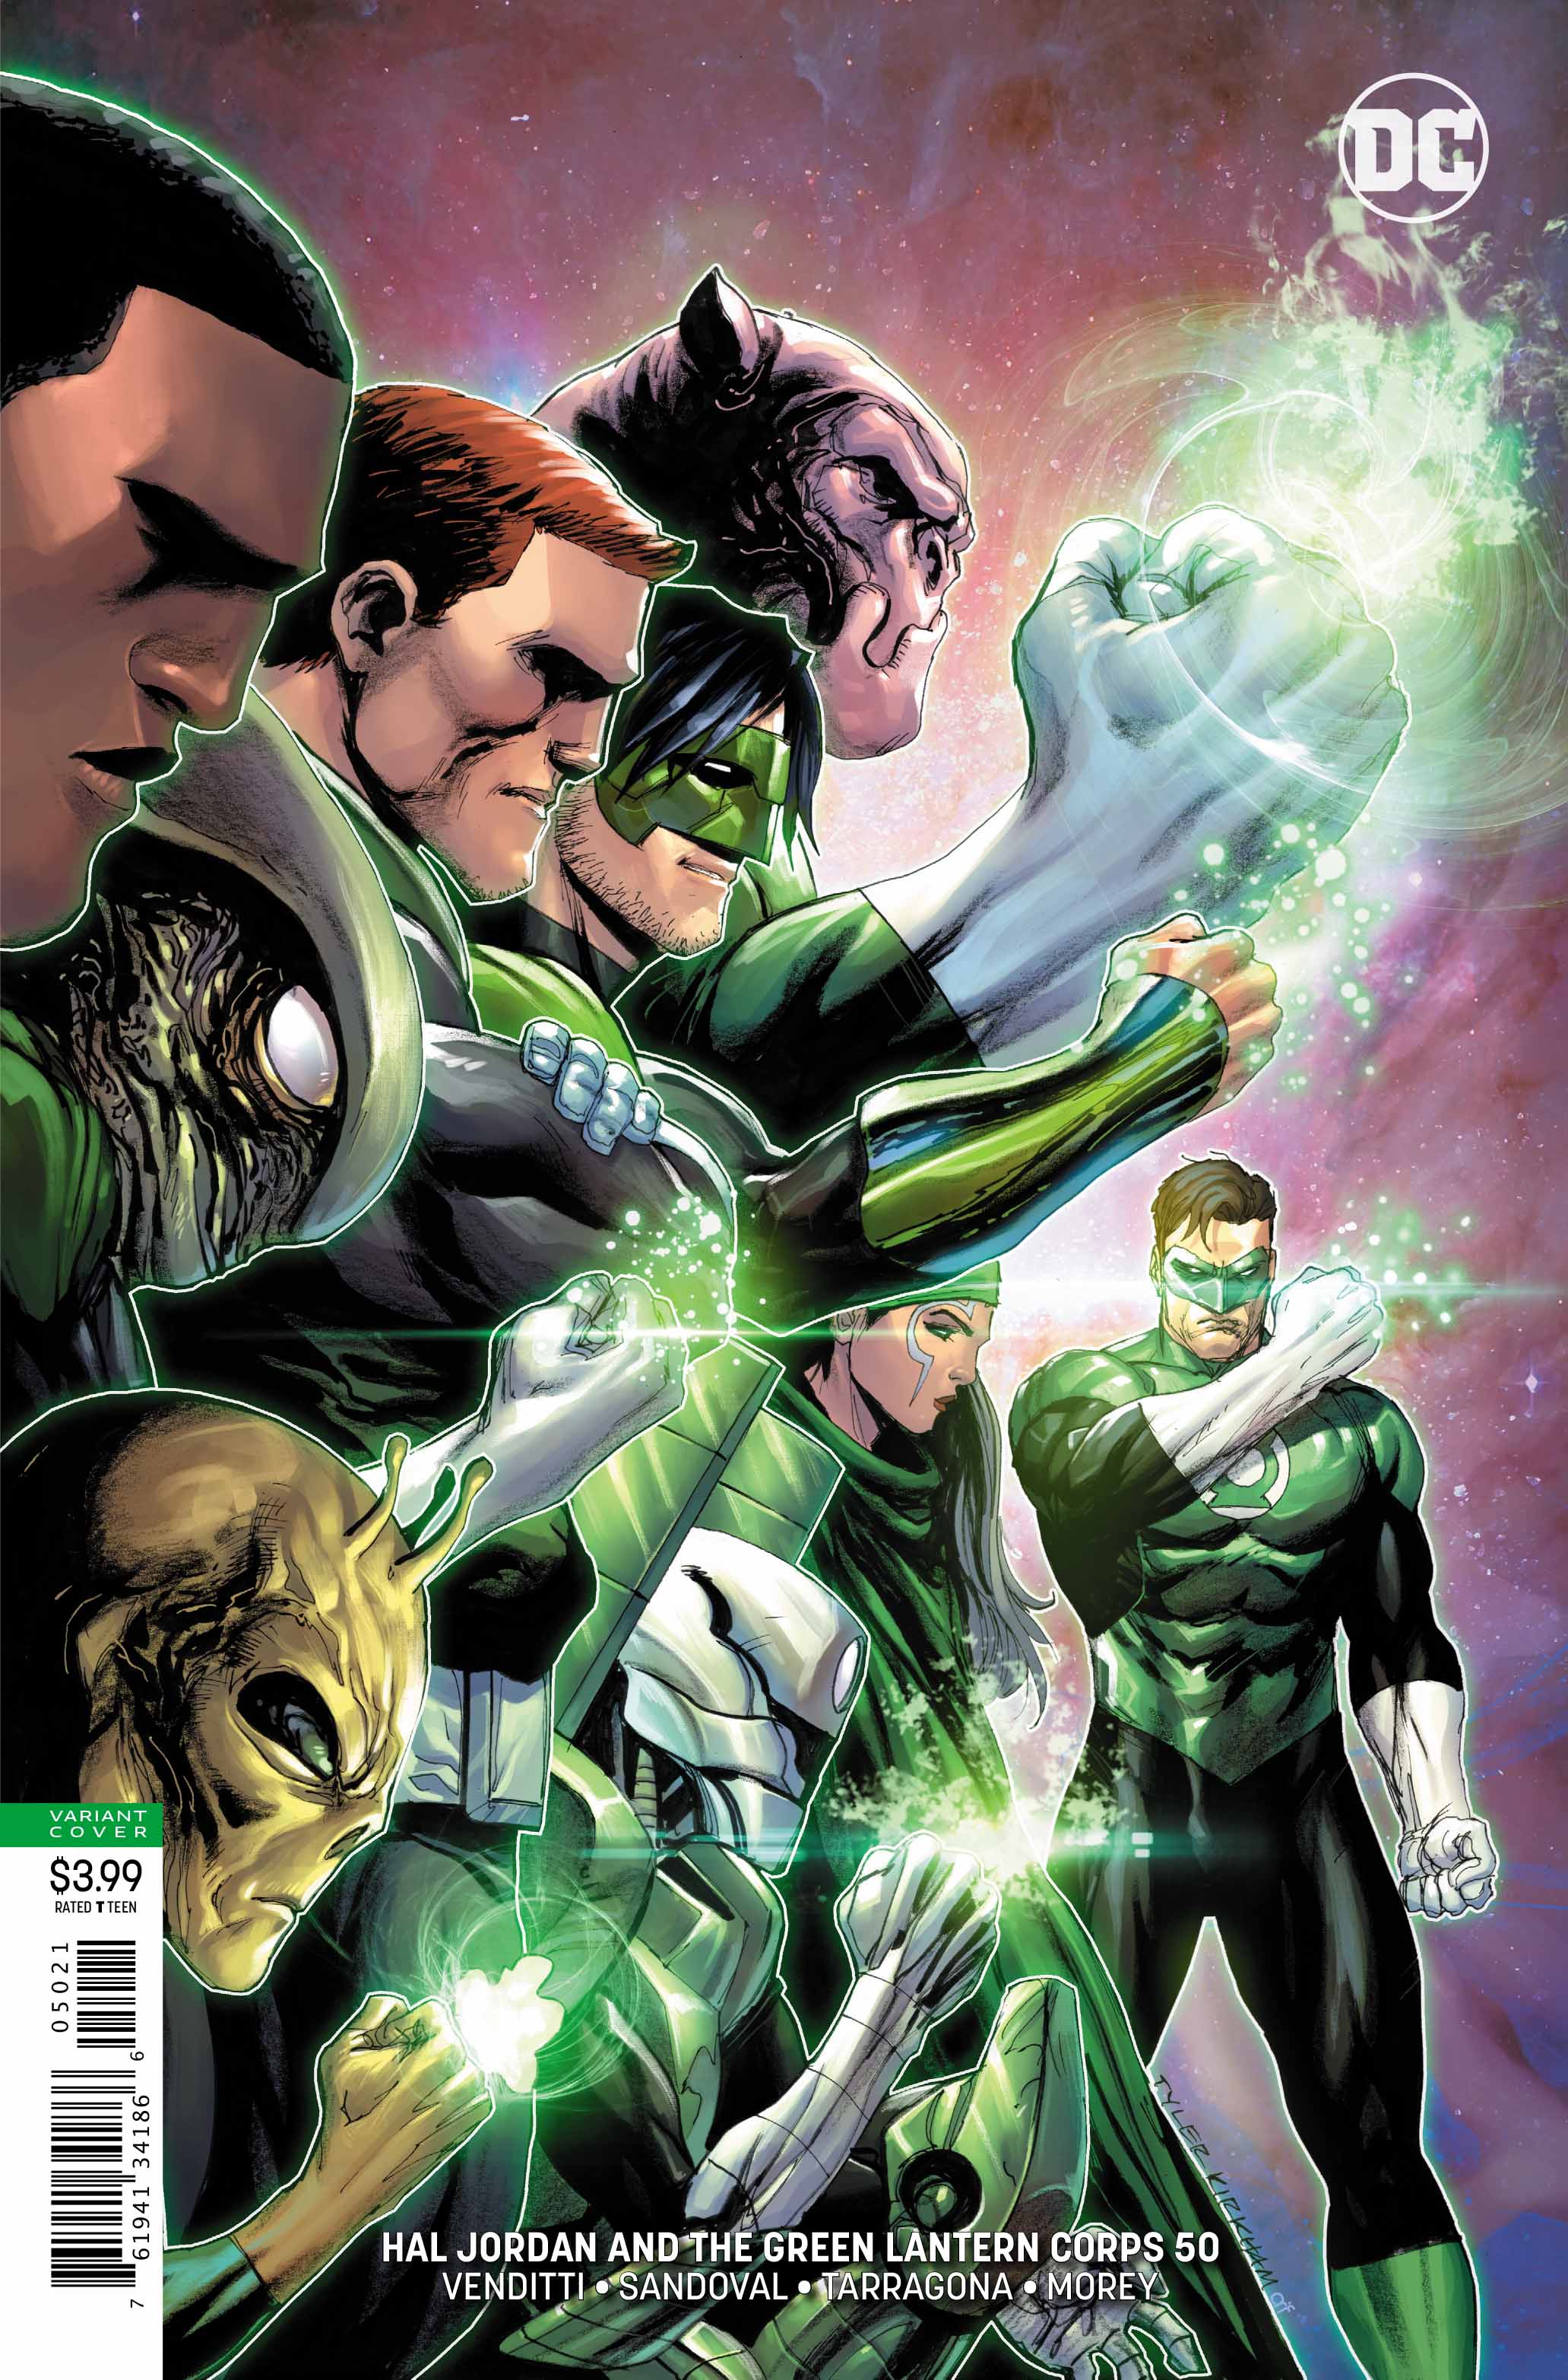 Hal Jordan and the Green Lantern Corps #50 review